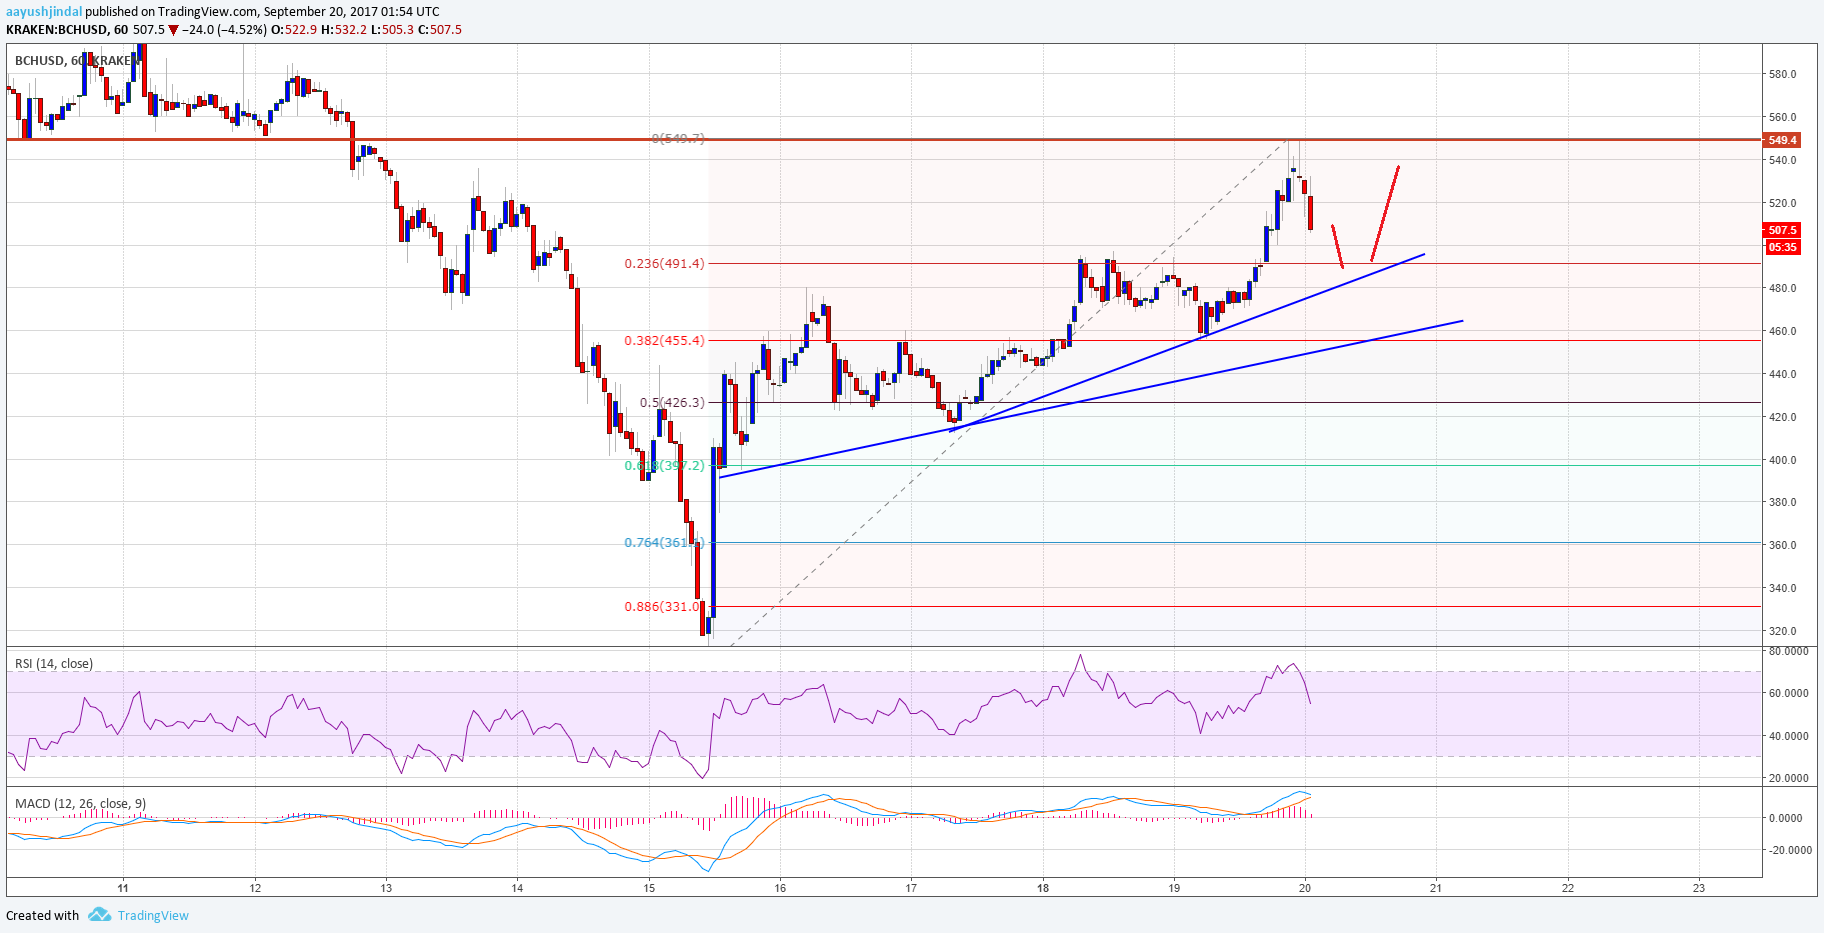 Bitcoin Cash Technical Analysis – BCH/USD Spikes Above $500